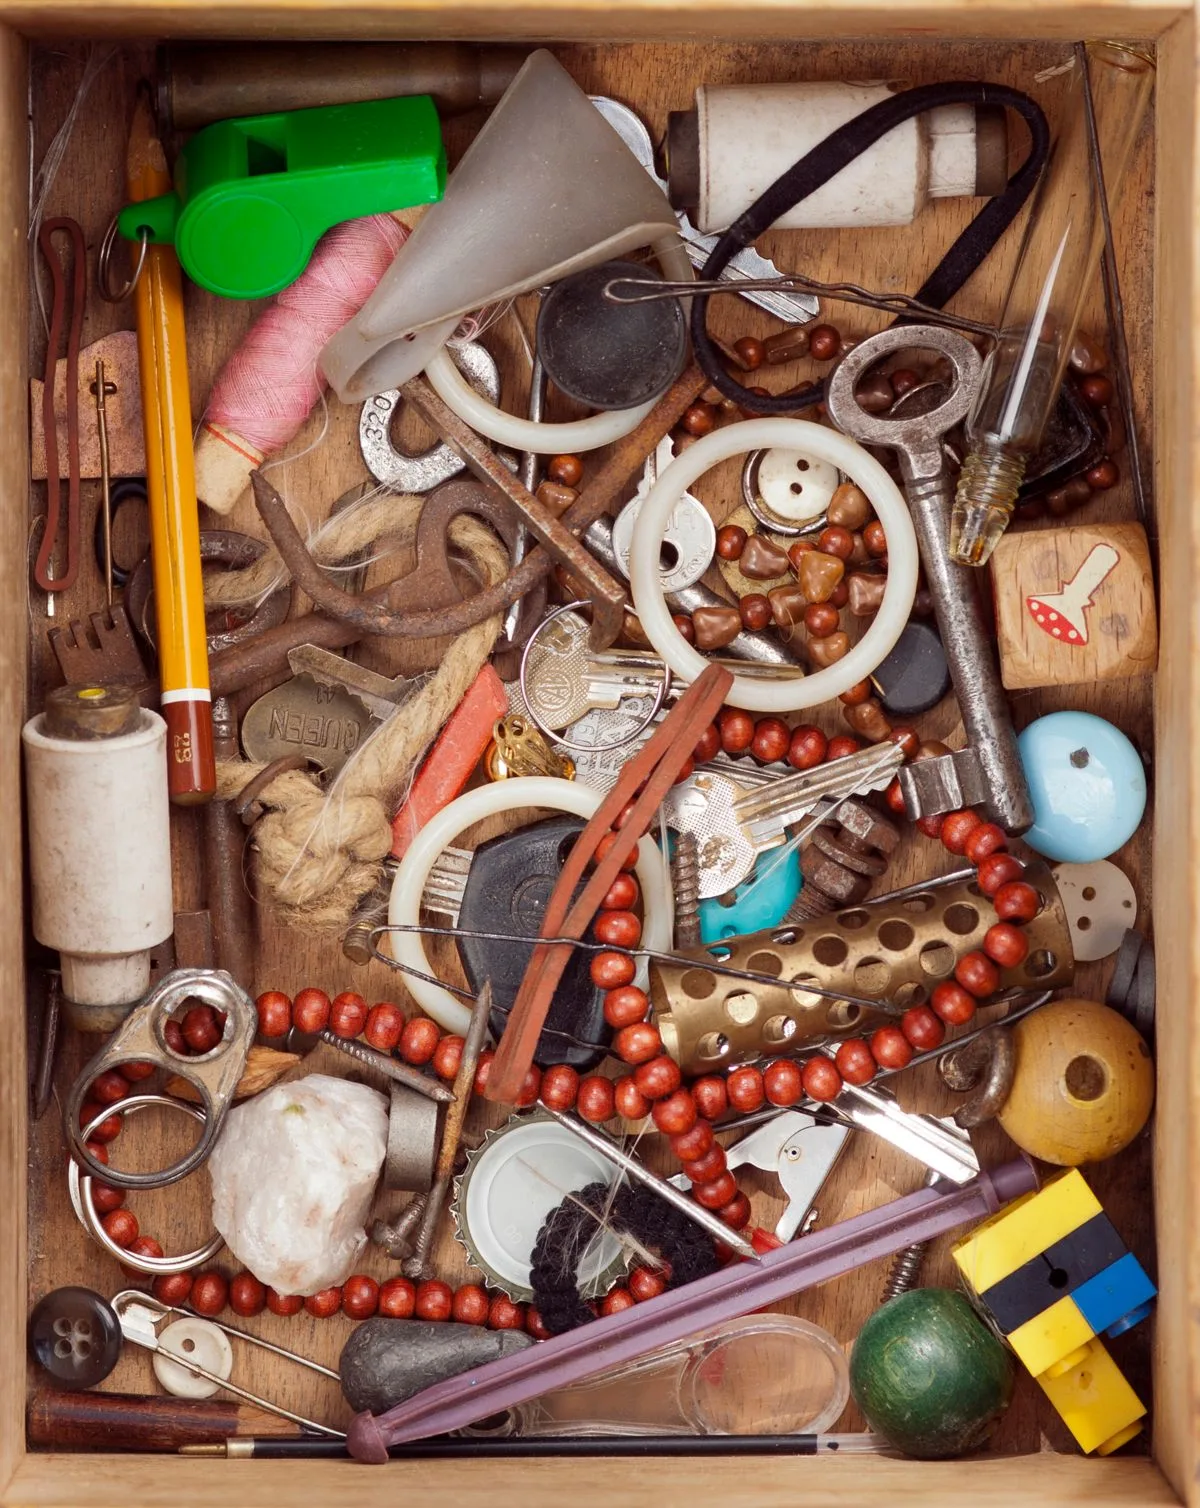 clean out your junk drawer